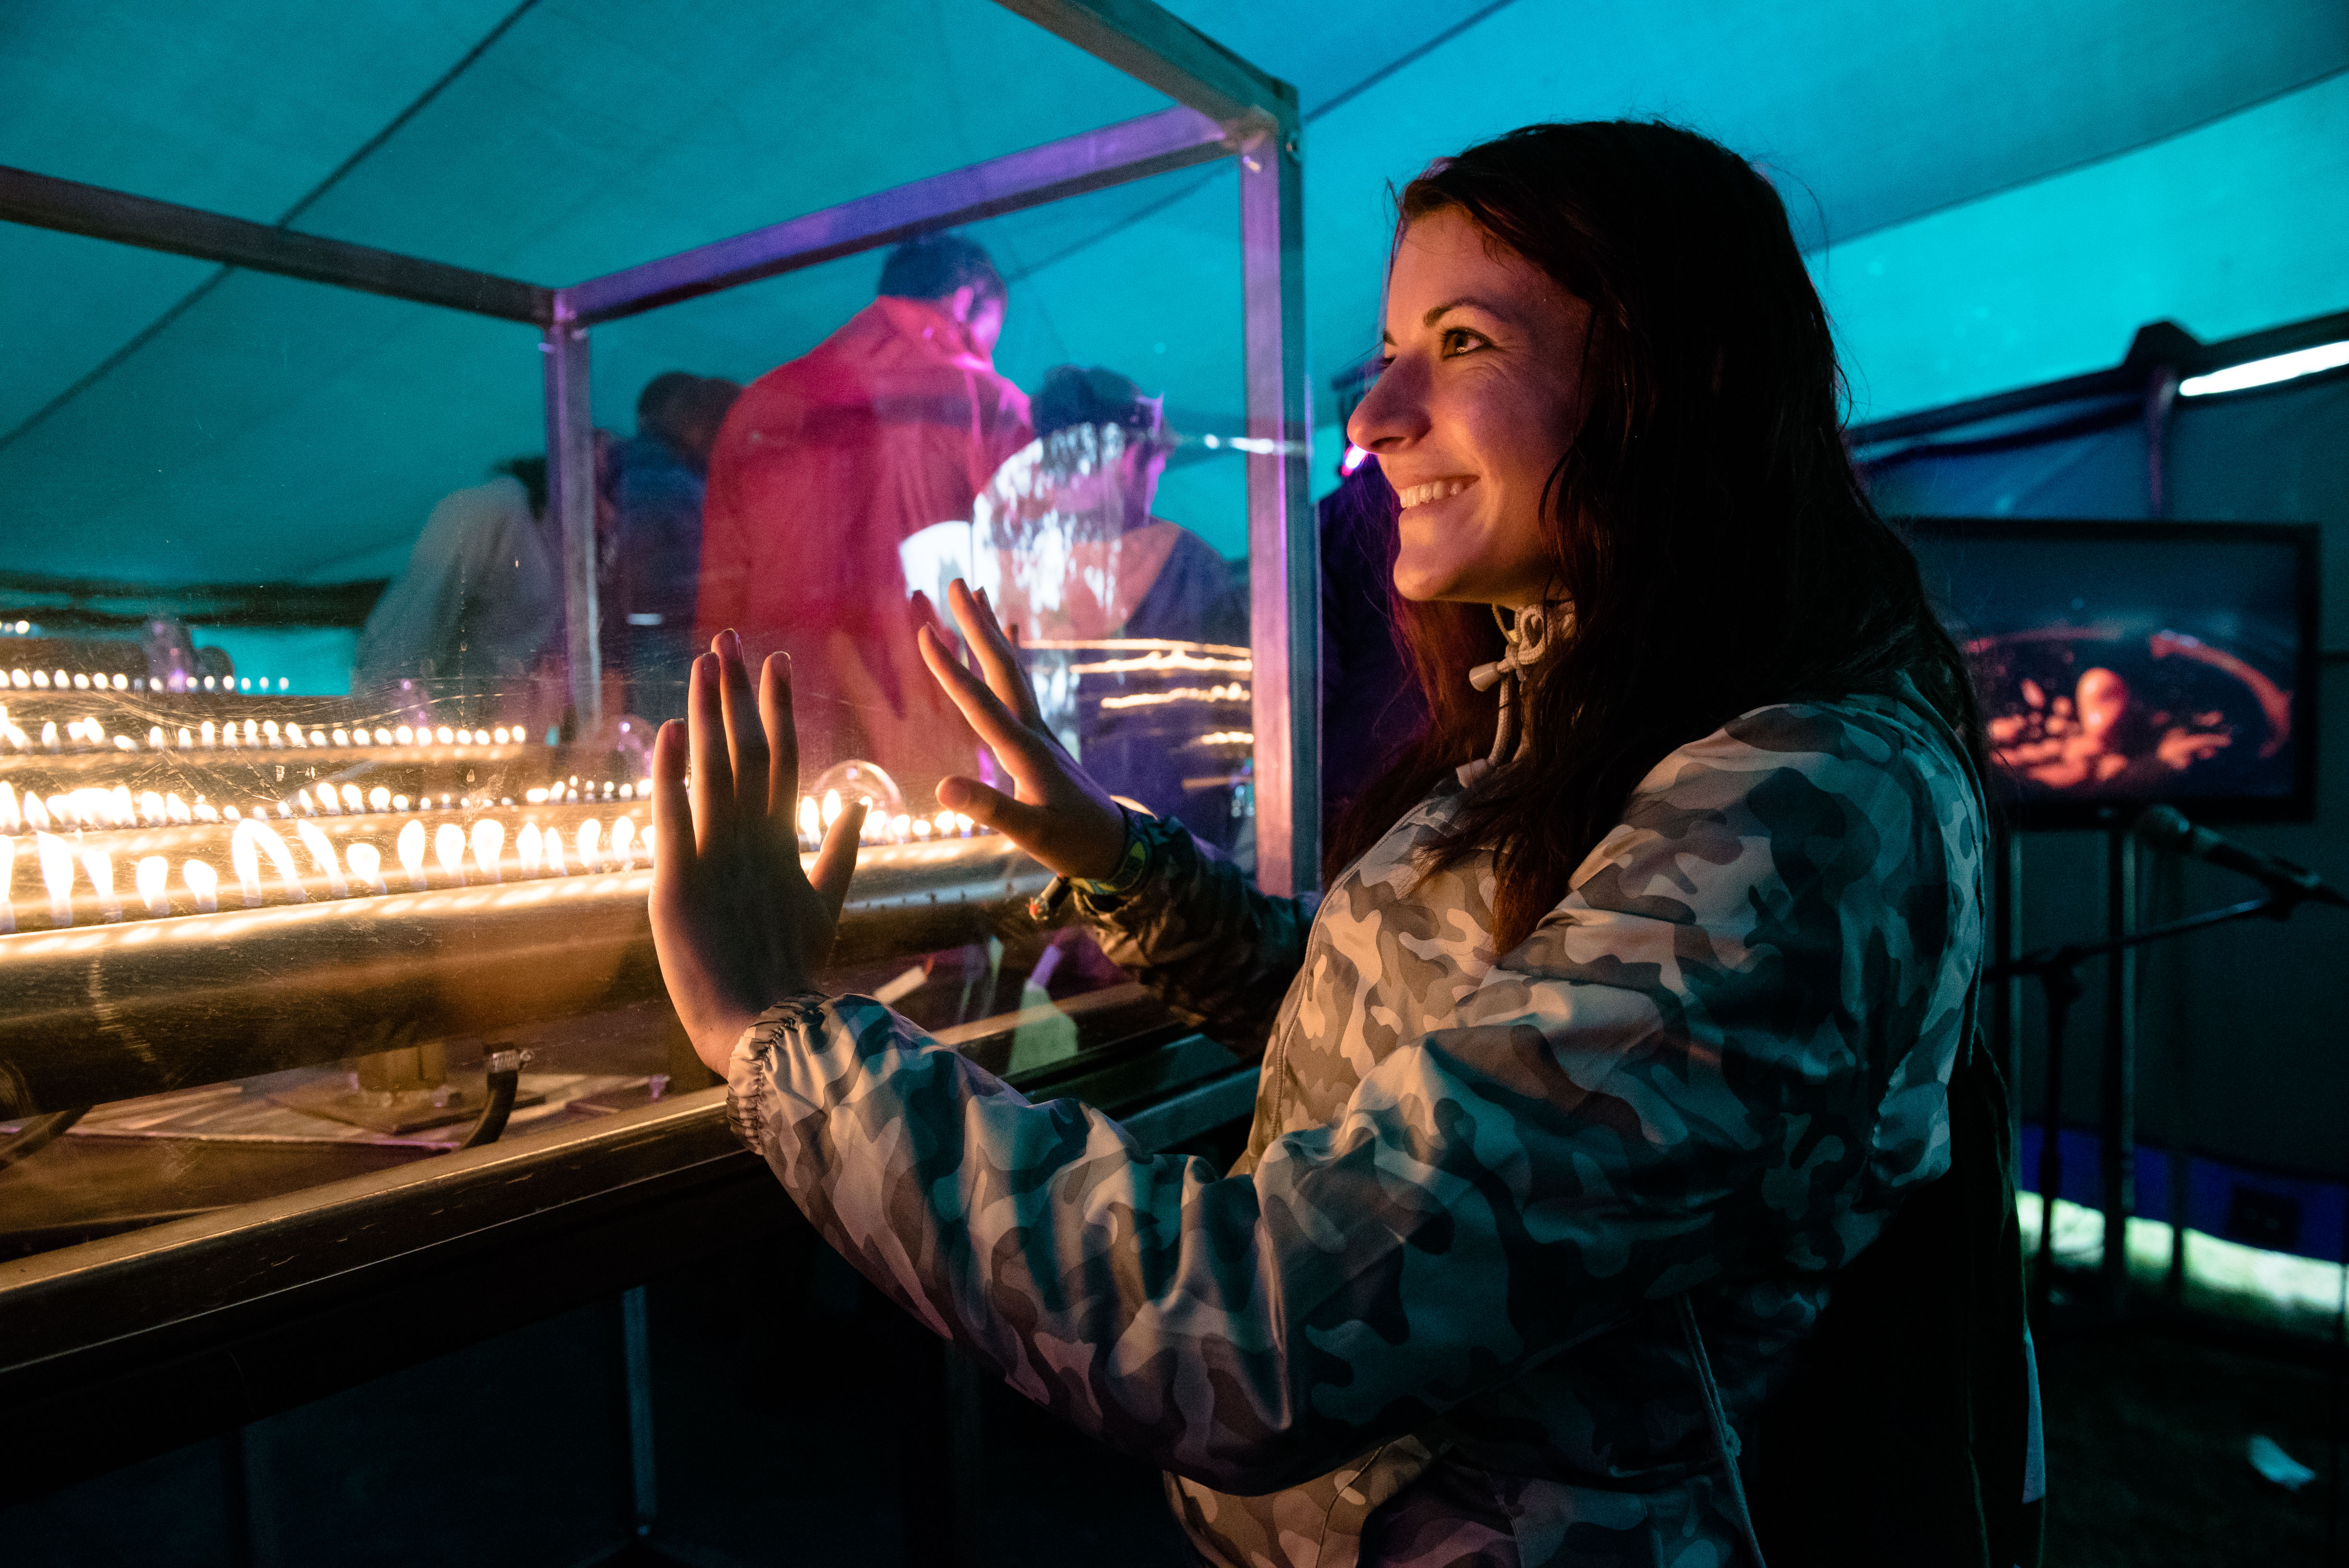 Fire Organ Makes Music and Flame at Secret Garden Party